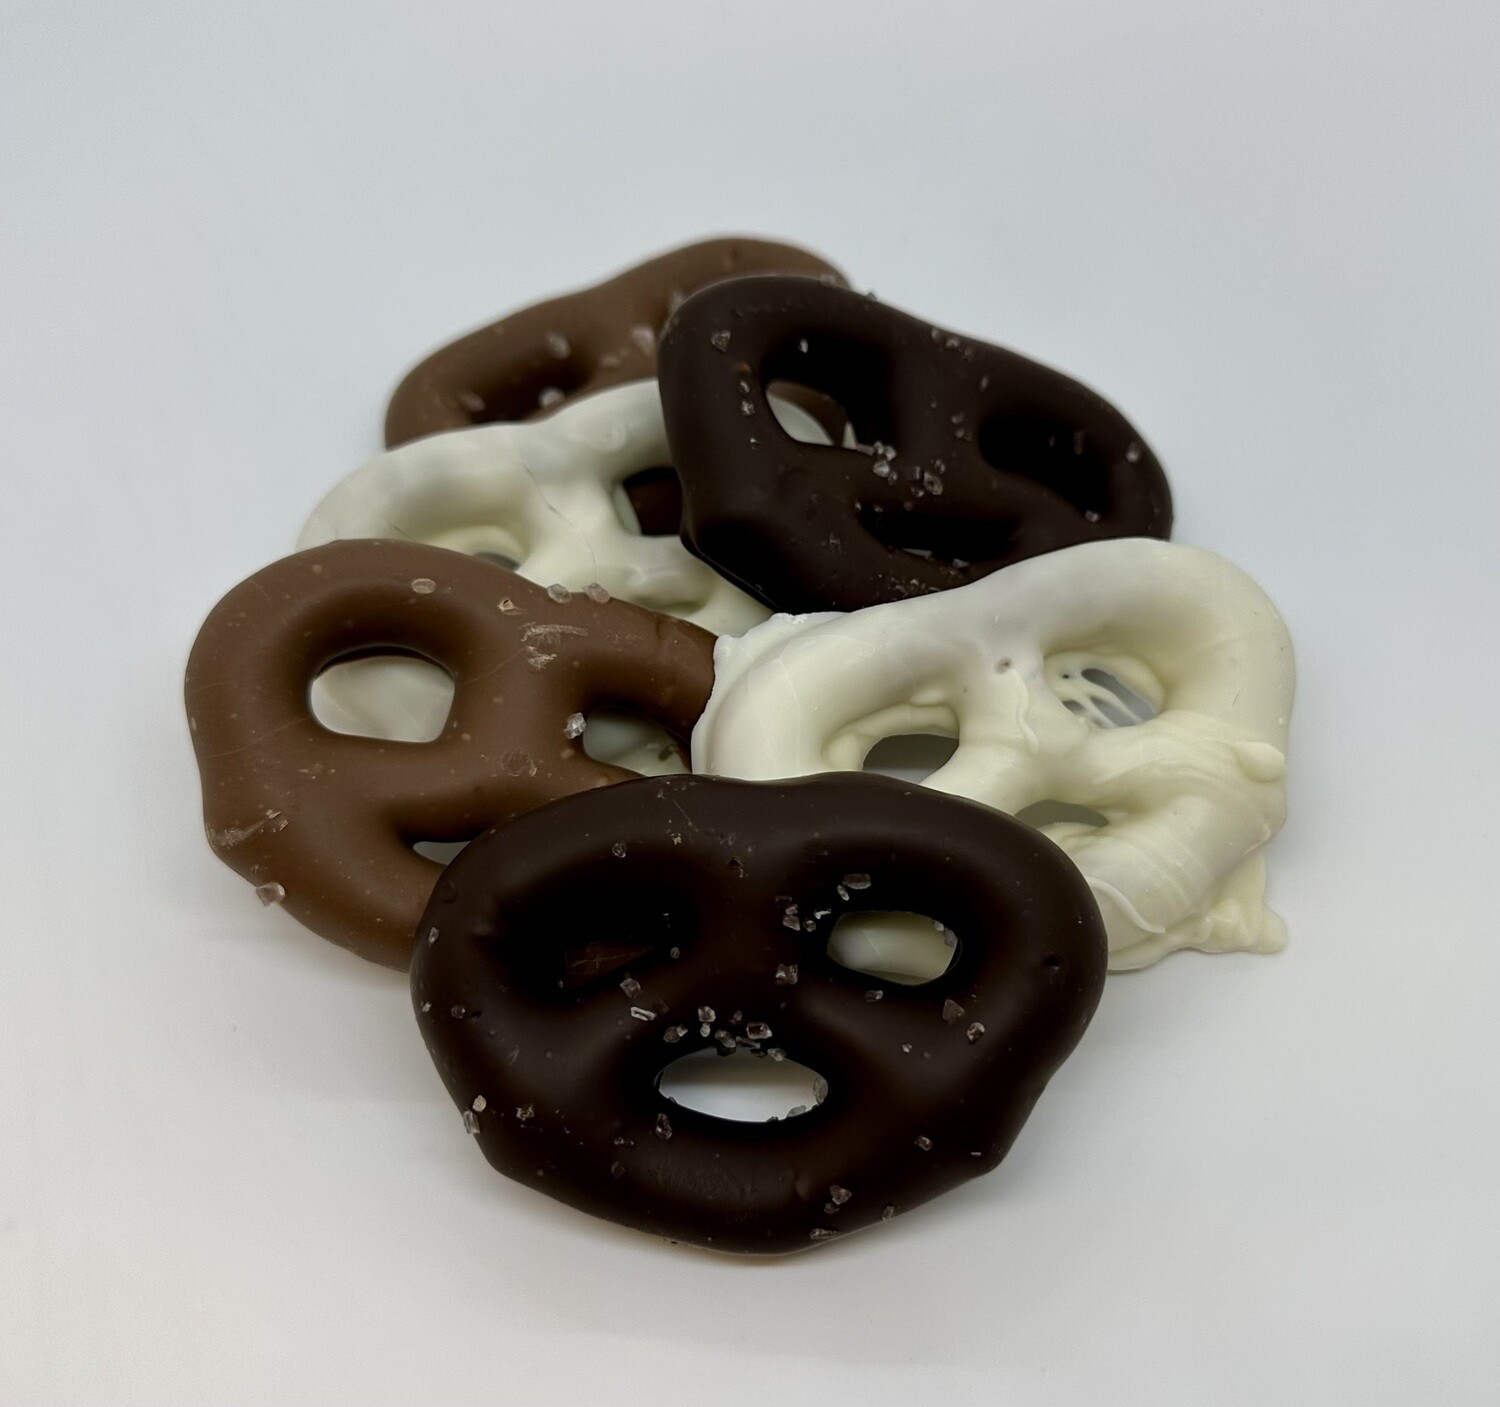 1 Pound of Chocolate Covered Pretzels